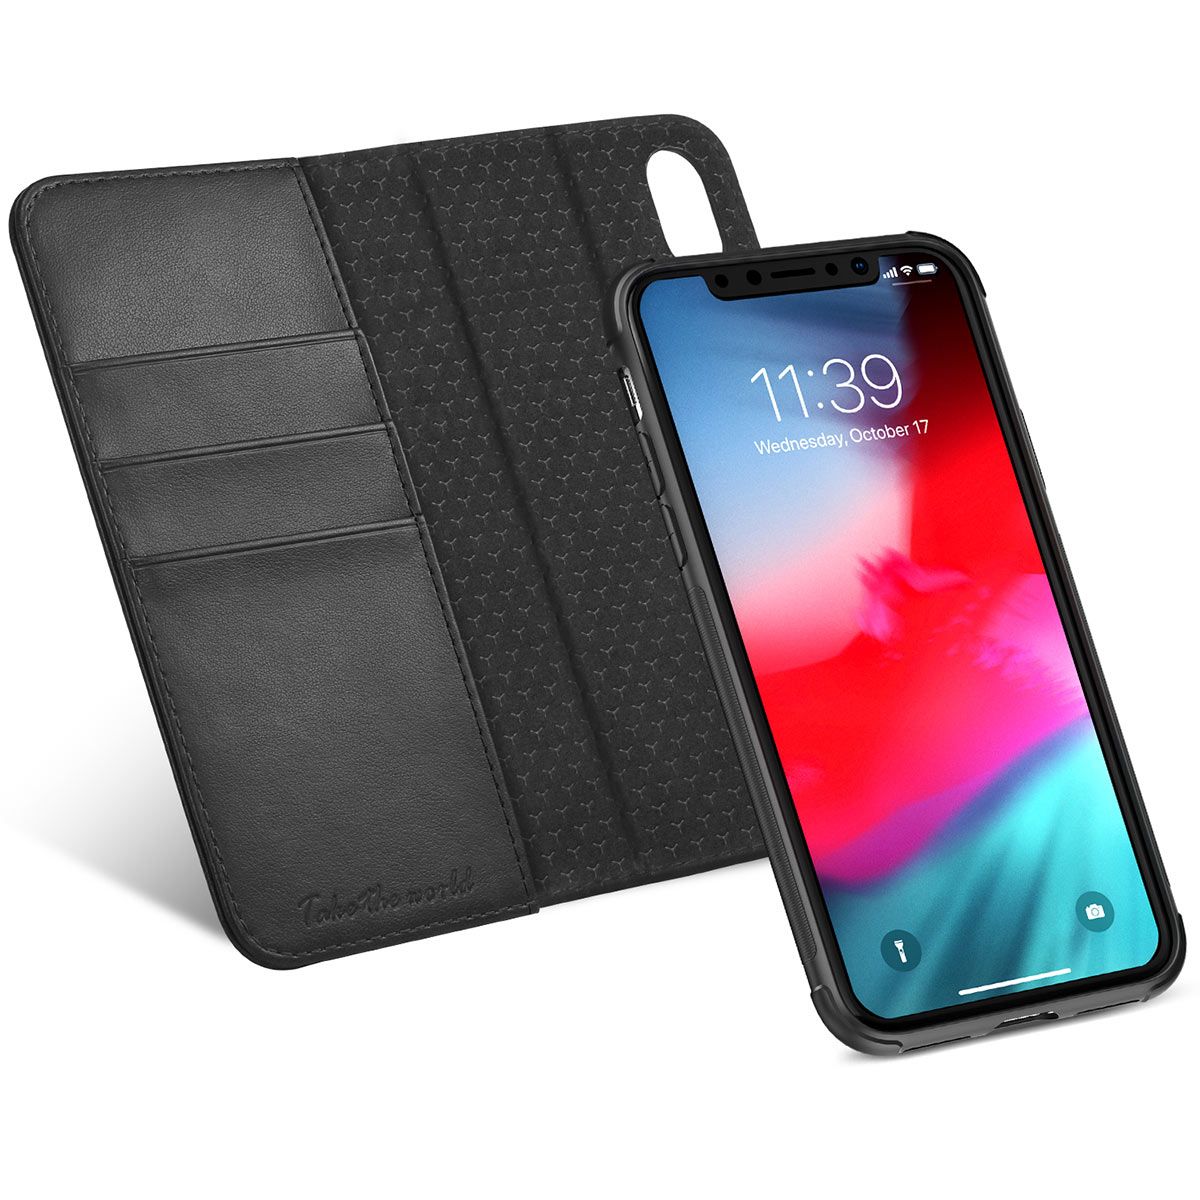 TUCCH iPhone XS Leather Wallet Case, iPhone XS Detachable Case, 2IN1 Folio / Flip Cover with ...